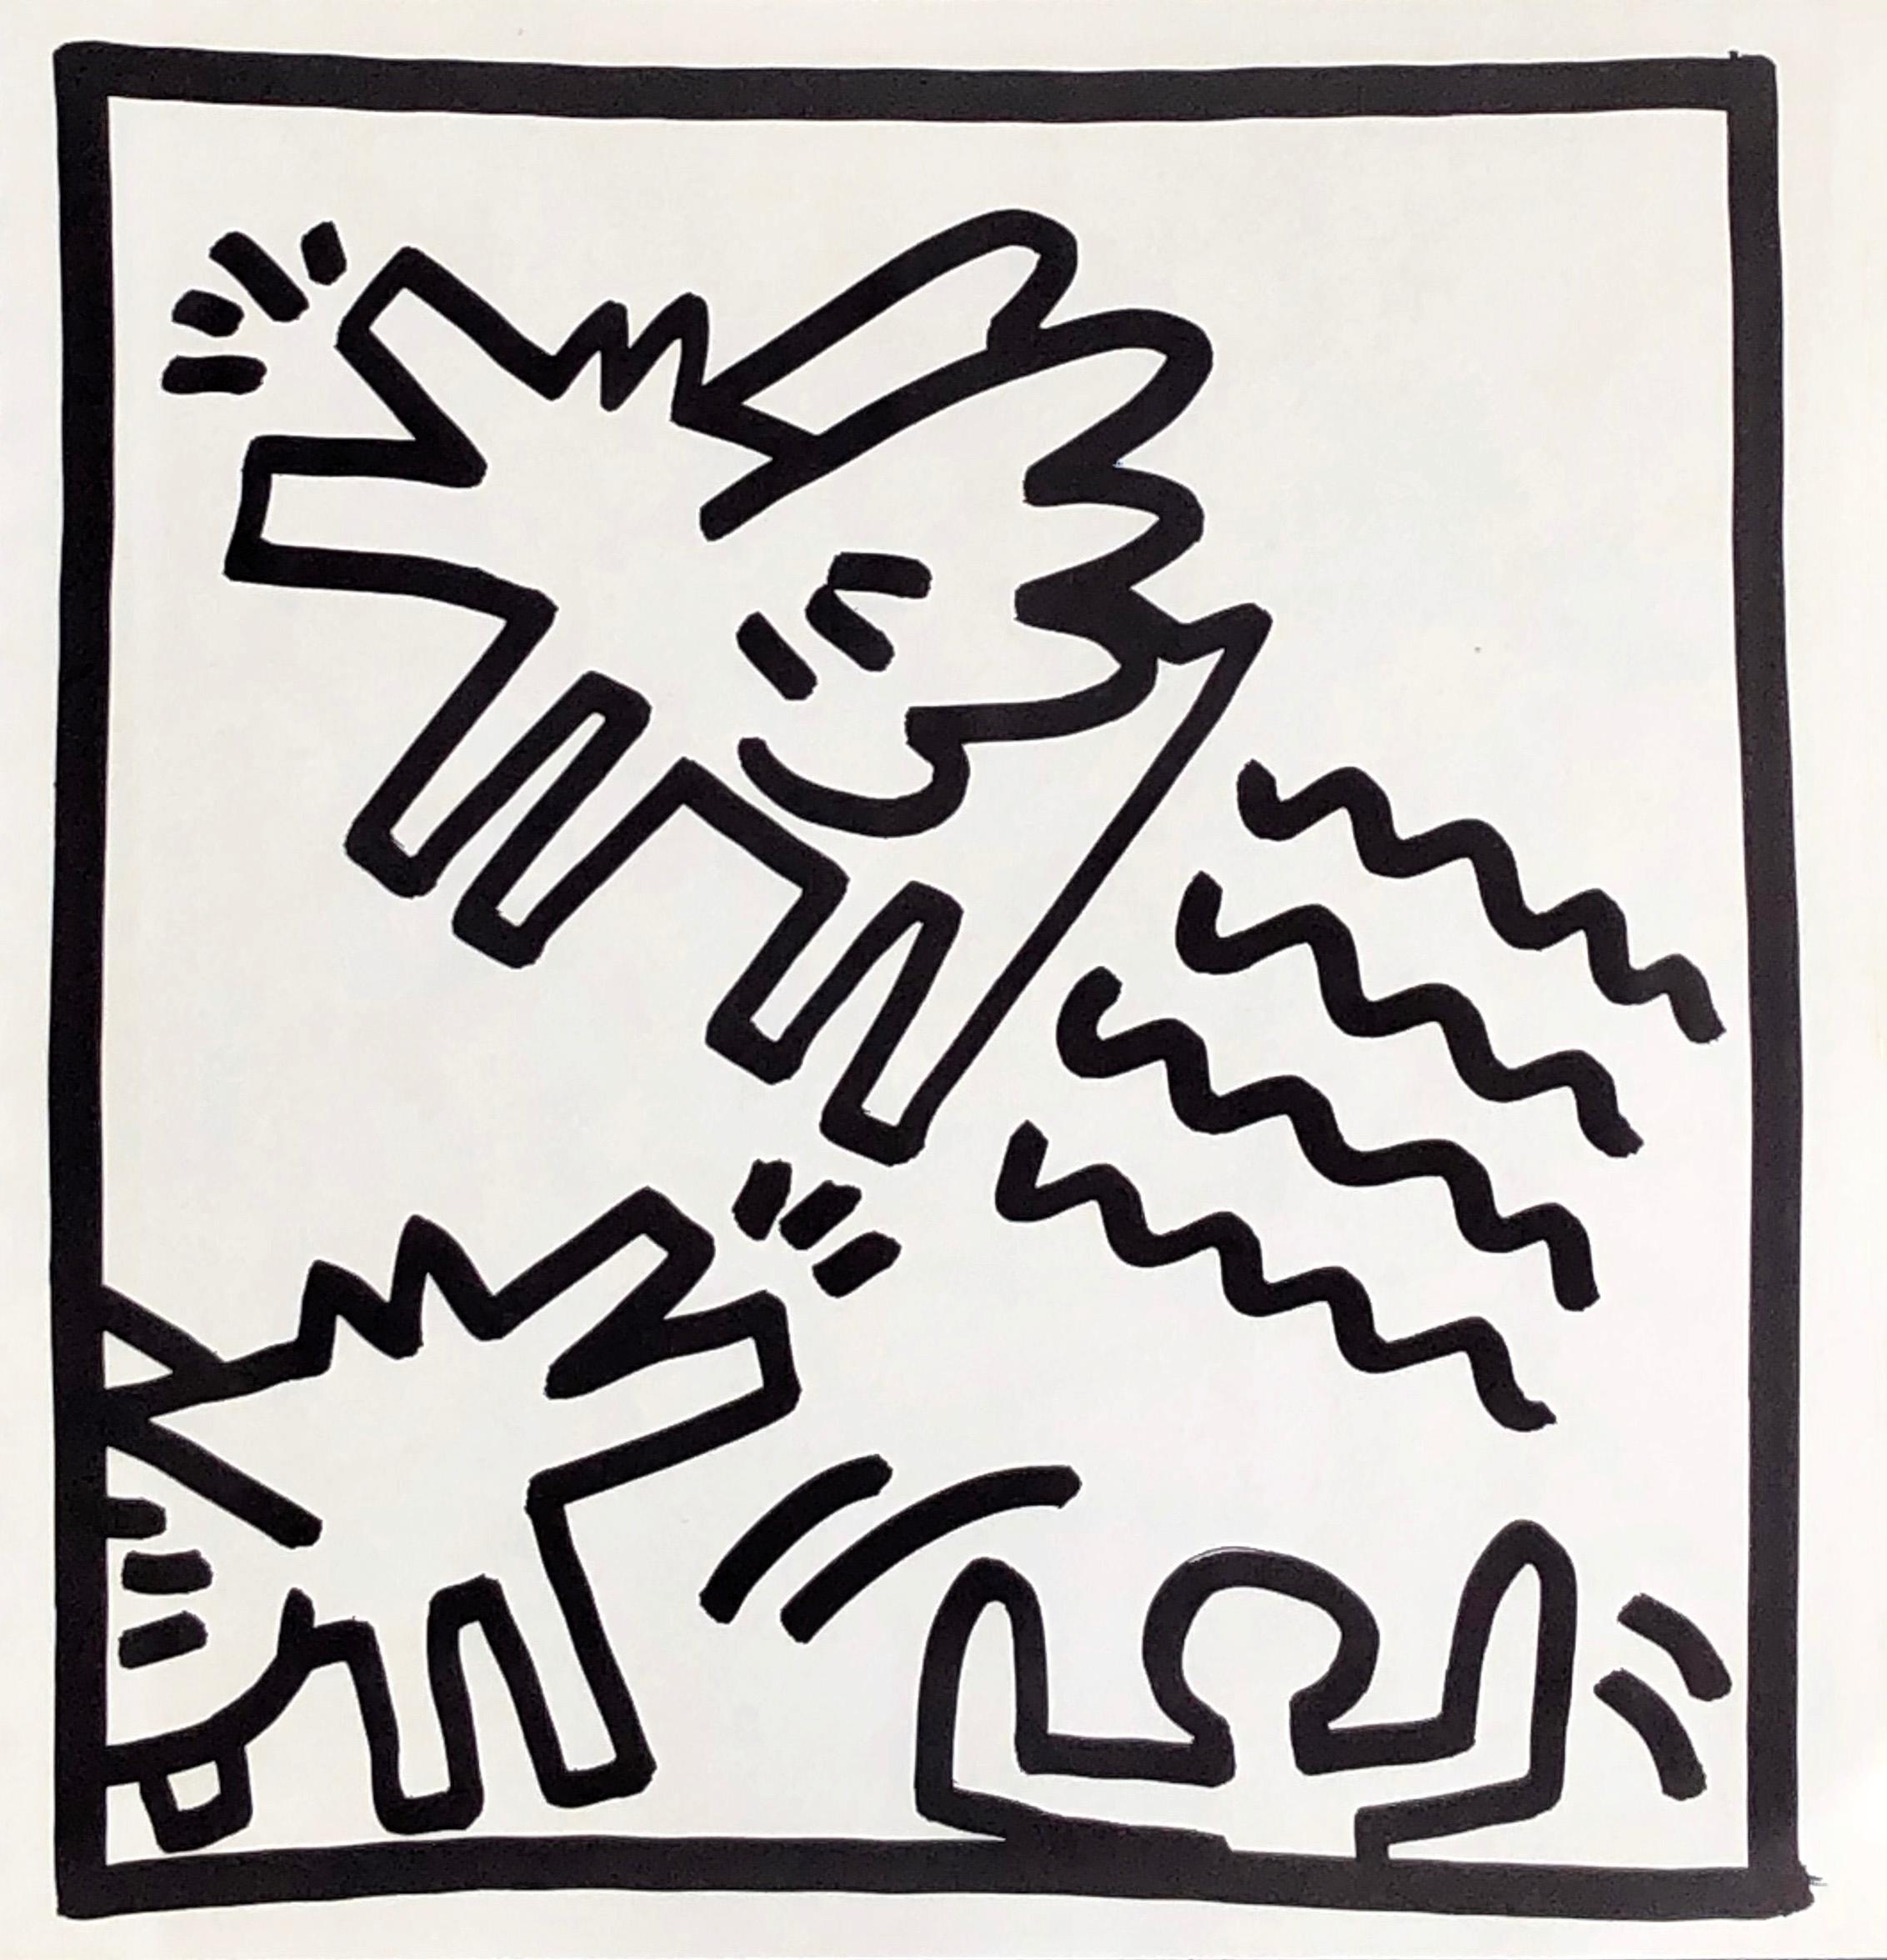 (after) Keith Haring Animal Print - Keith Haring (untitled) Flying Dogs lithograph 1982 (Keith Haring prints) 